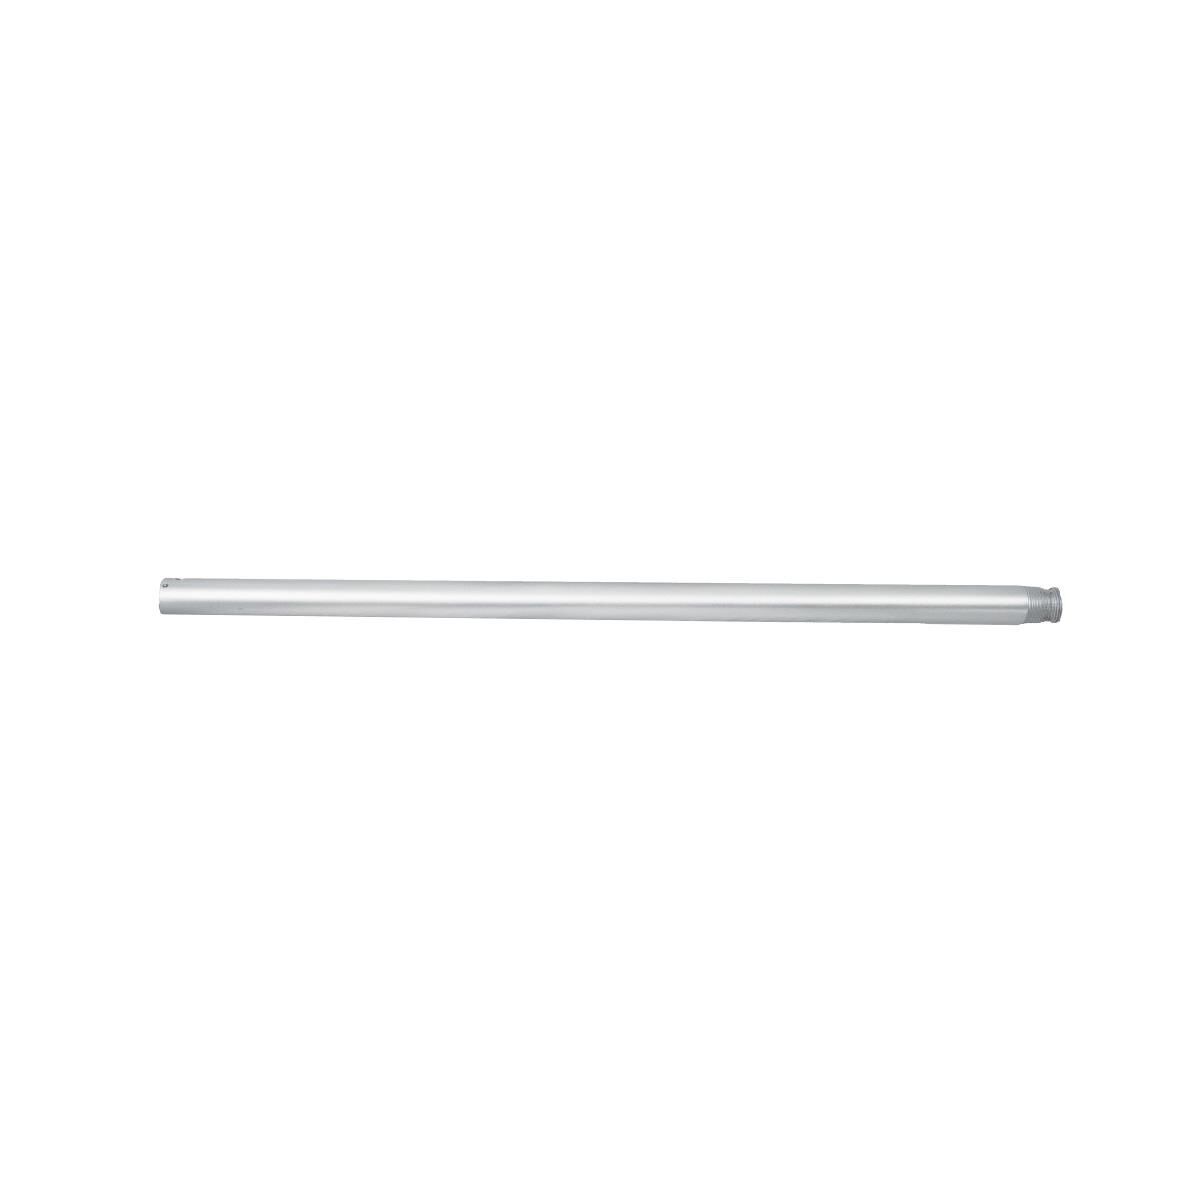 Photos - Fan WAC Lighting 72 Inch  Downrod - DR72-MB - Modern Contemporary DR72-MB